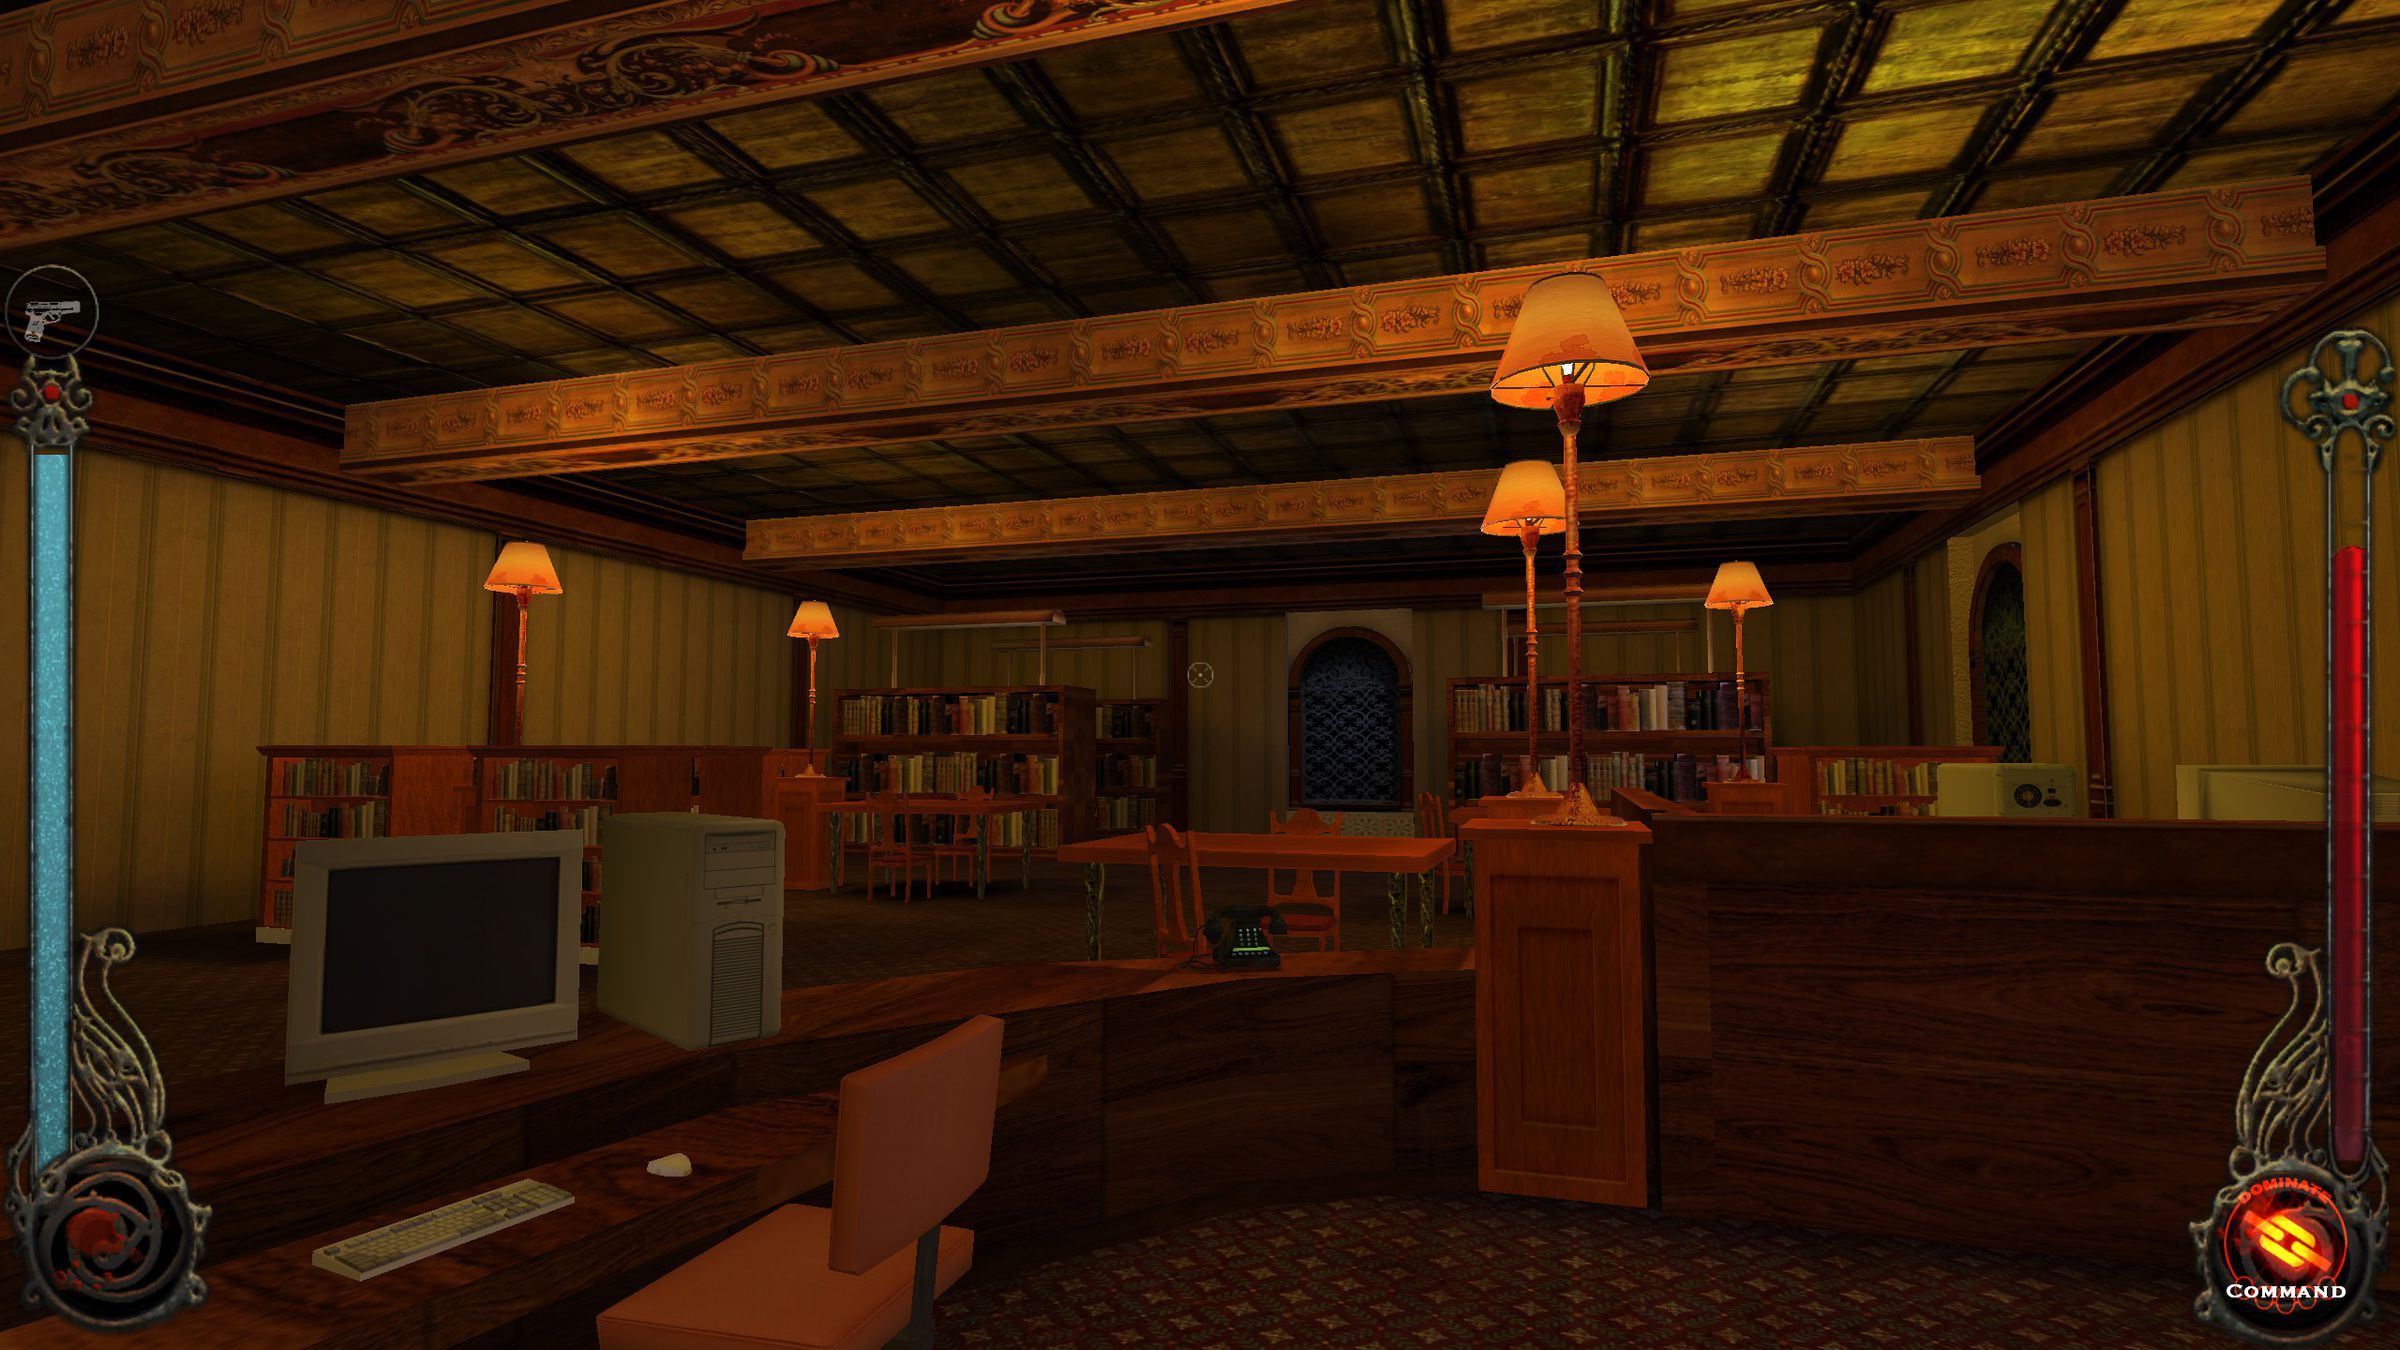 The LA Public Library, as rendered in the unofficial patch.